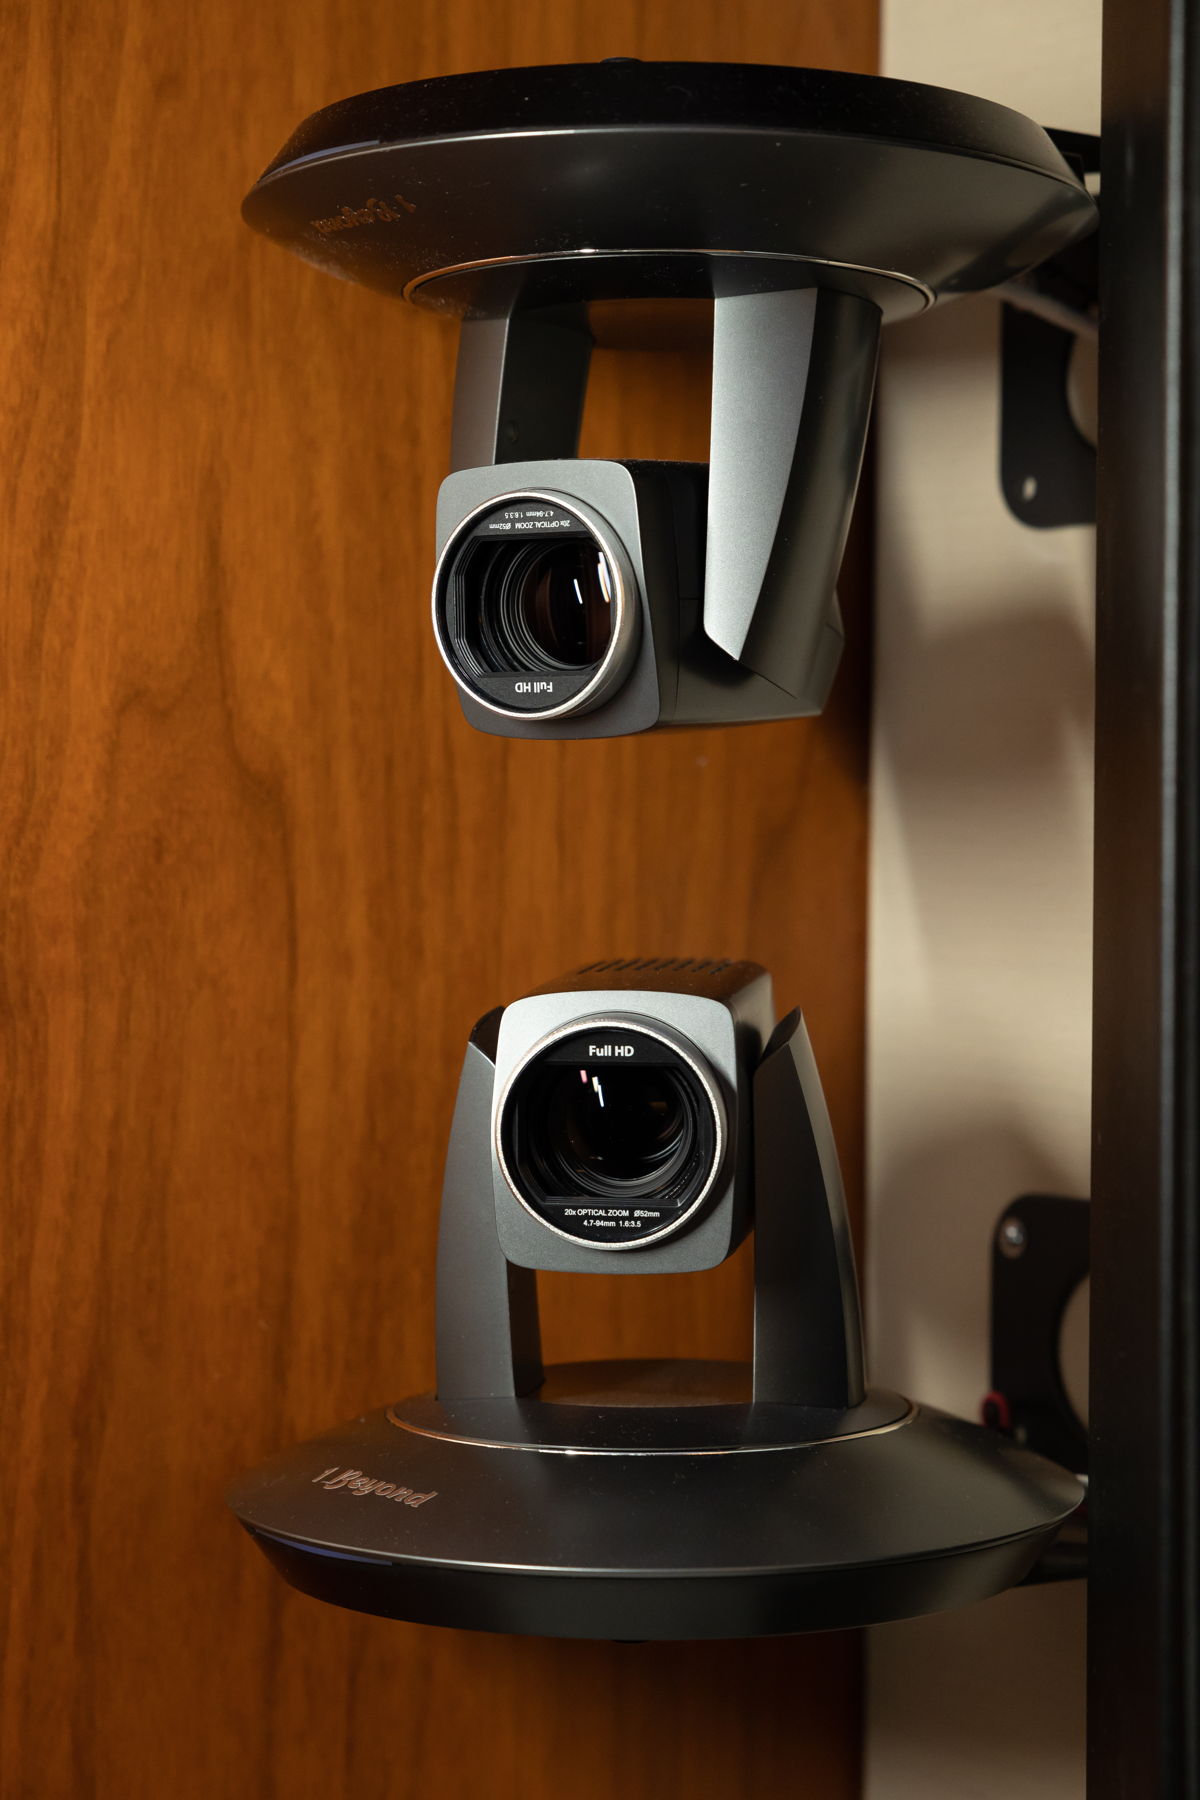 In the Board Room, Sennheiser TeamConnect Ceiling 2s are used to drive a 1 Beyond Autotracker system, which has seven built-in cameras. There are two 1 Beyond cameras on the left side of the room facing the right side, two on the right side facing the left side, and three at the center pointed at the end tables, the head of the table and a ‘default’ wide shot.